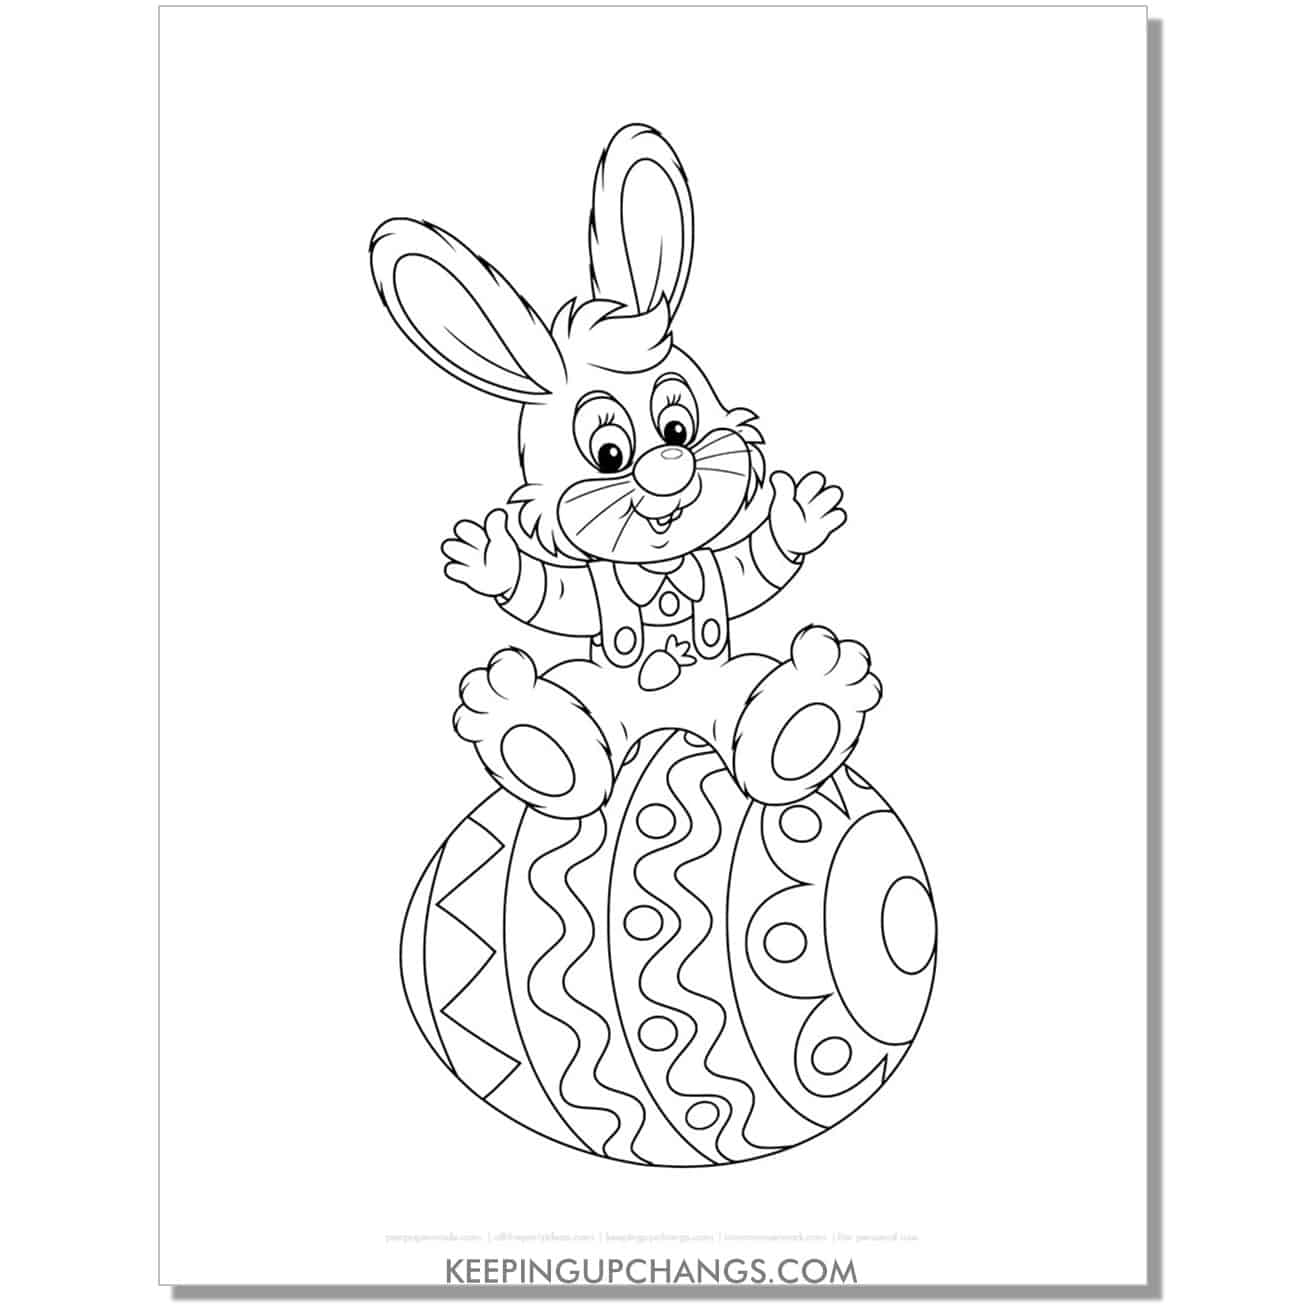 easter bunny in overalls sitting on egg coloring page, sheet.